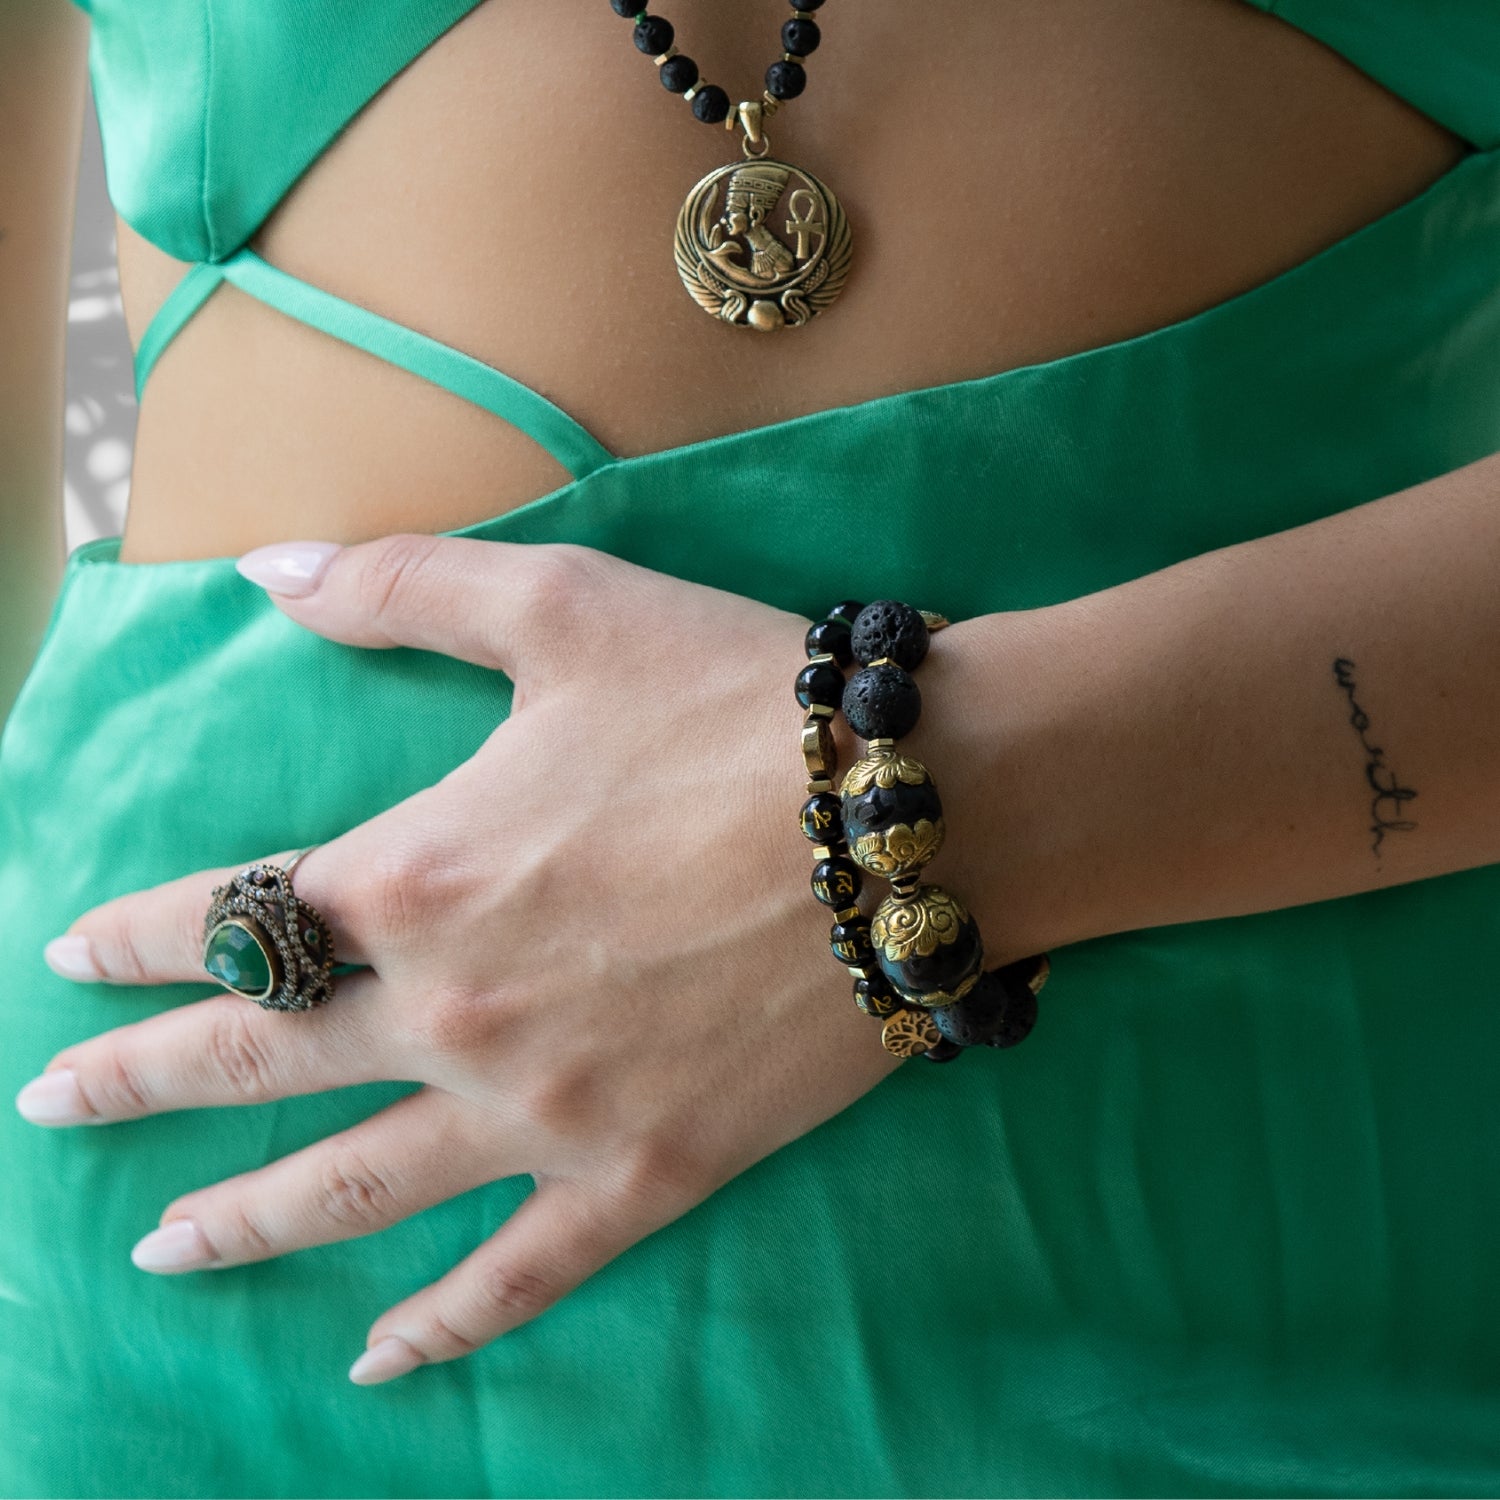 Hand model wearing Black Nepal Talisman Bracelet for Protection and Positive Energy.